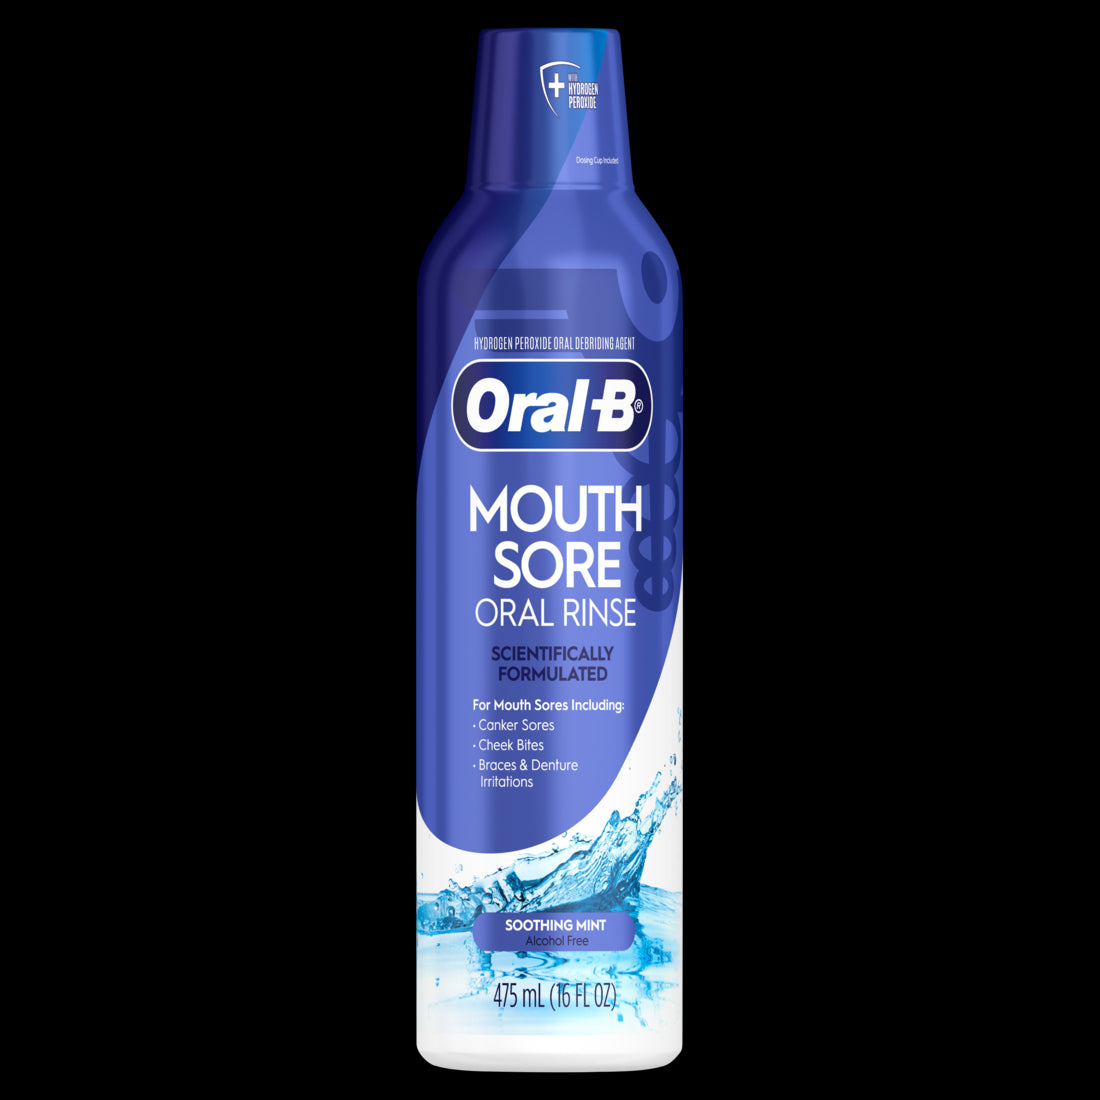 Oral-B Mouth Sore Oral Rinse, Soothing Mint Flavor - 475mL /16oz/4pk